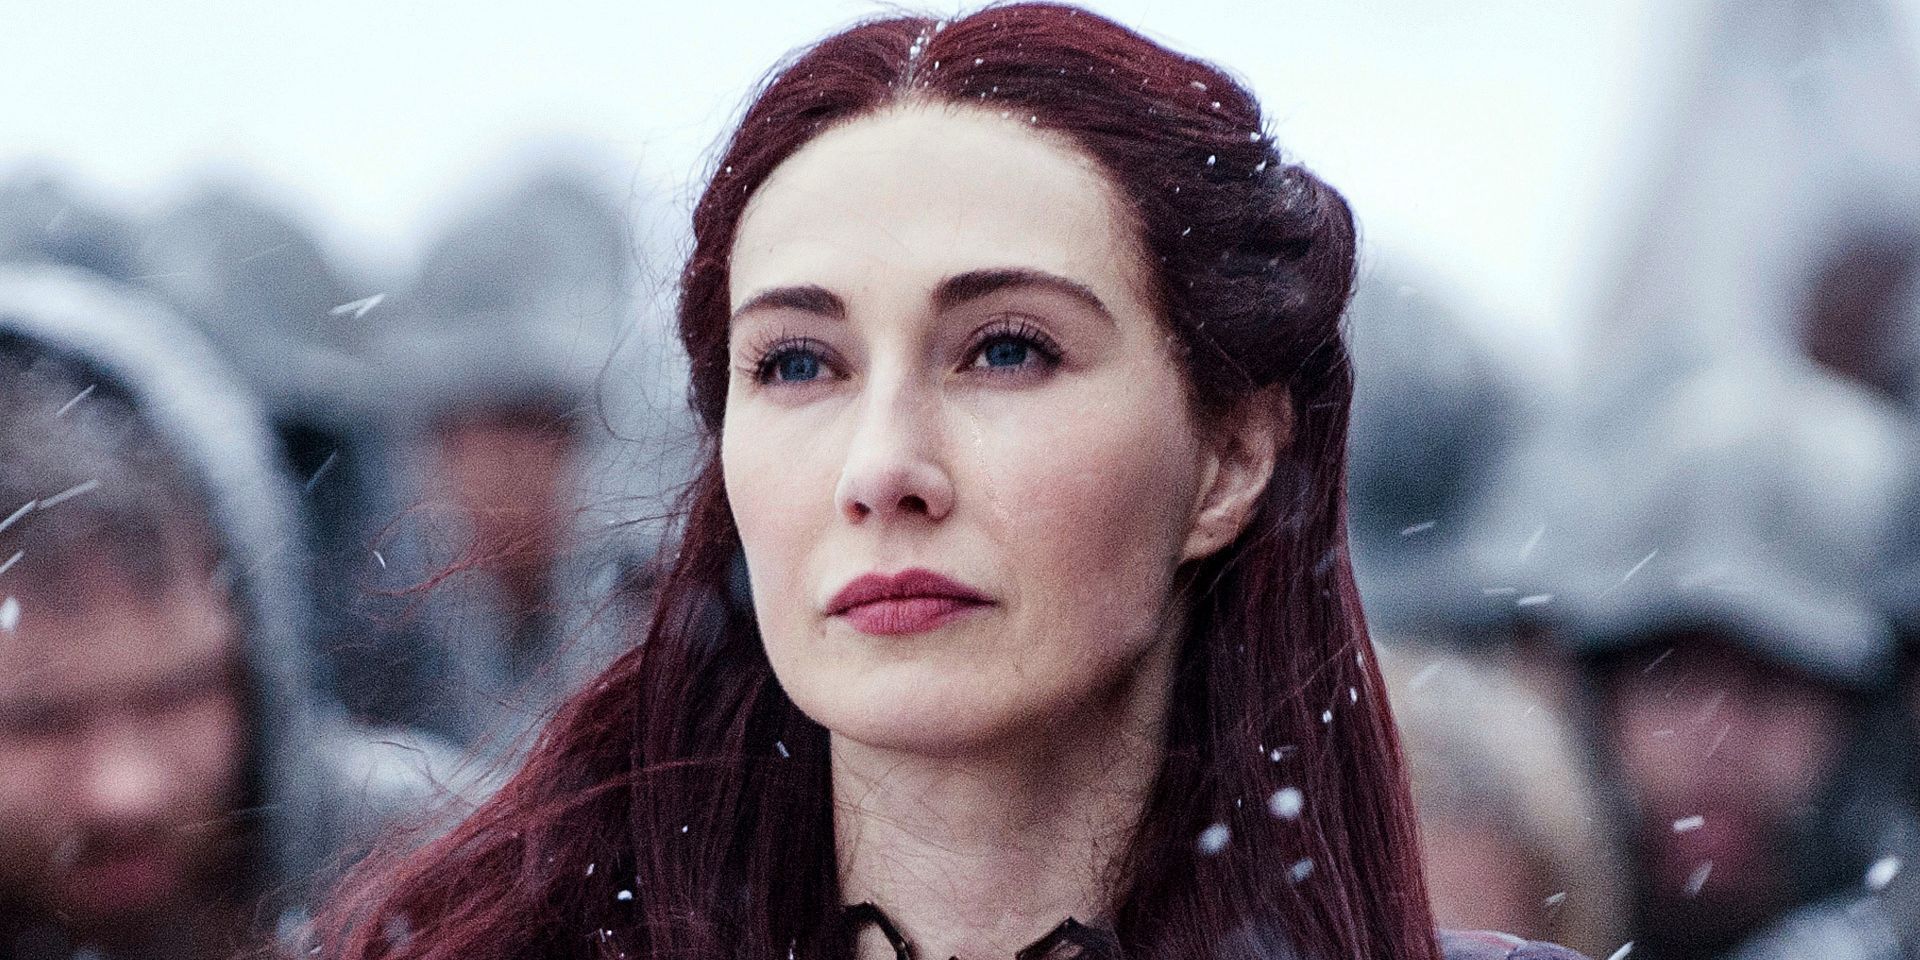 Melisandre watches the burning of Shereen in Game of Thrones